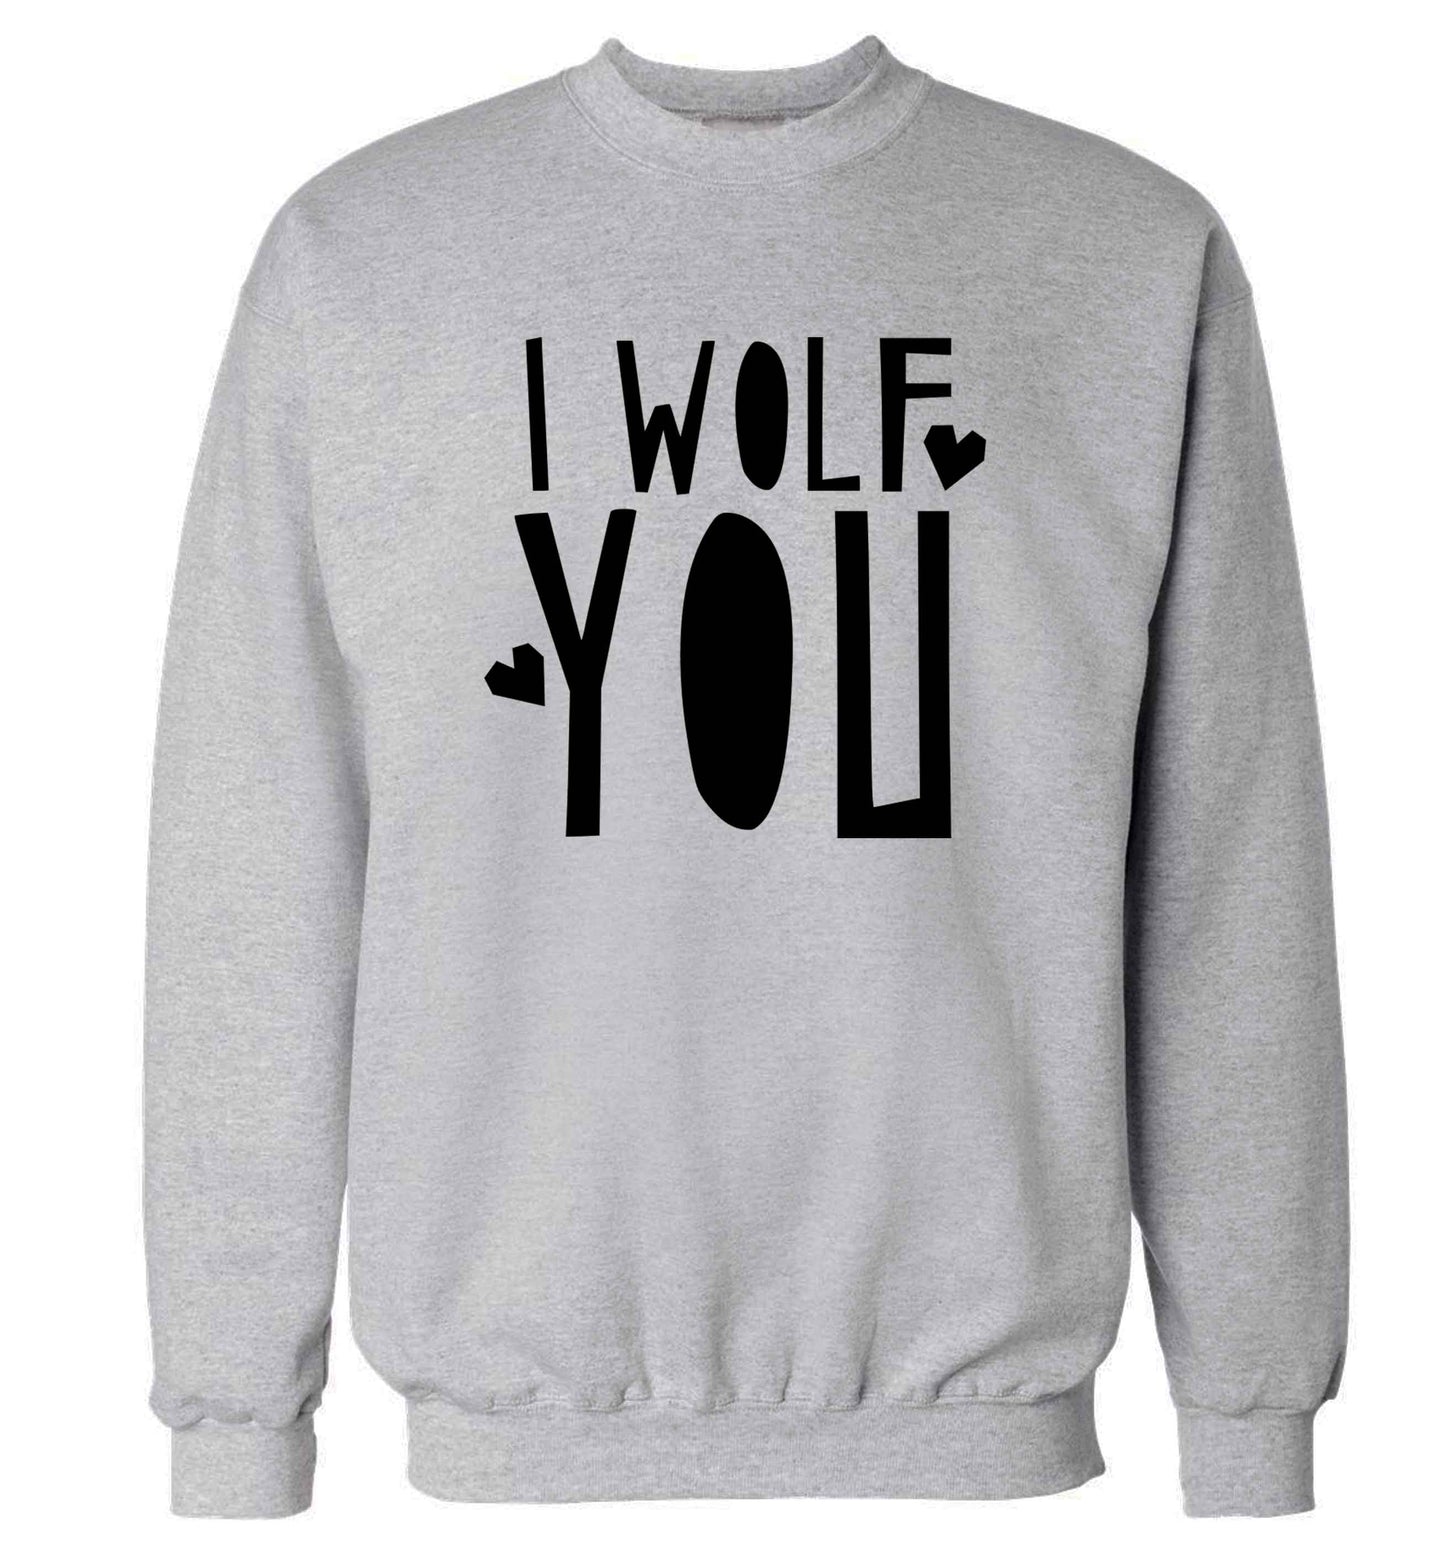 I wolf you adult's unisex grey sweater 2XL